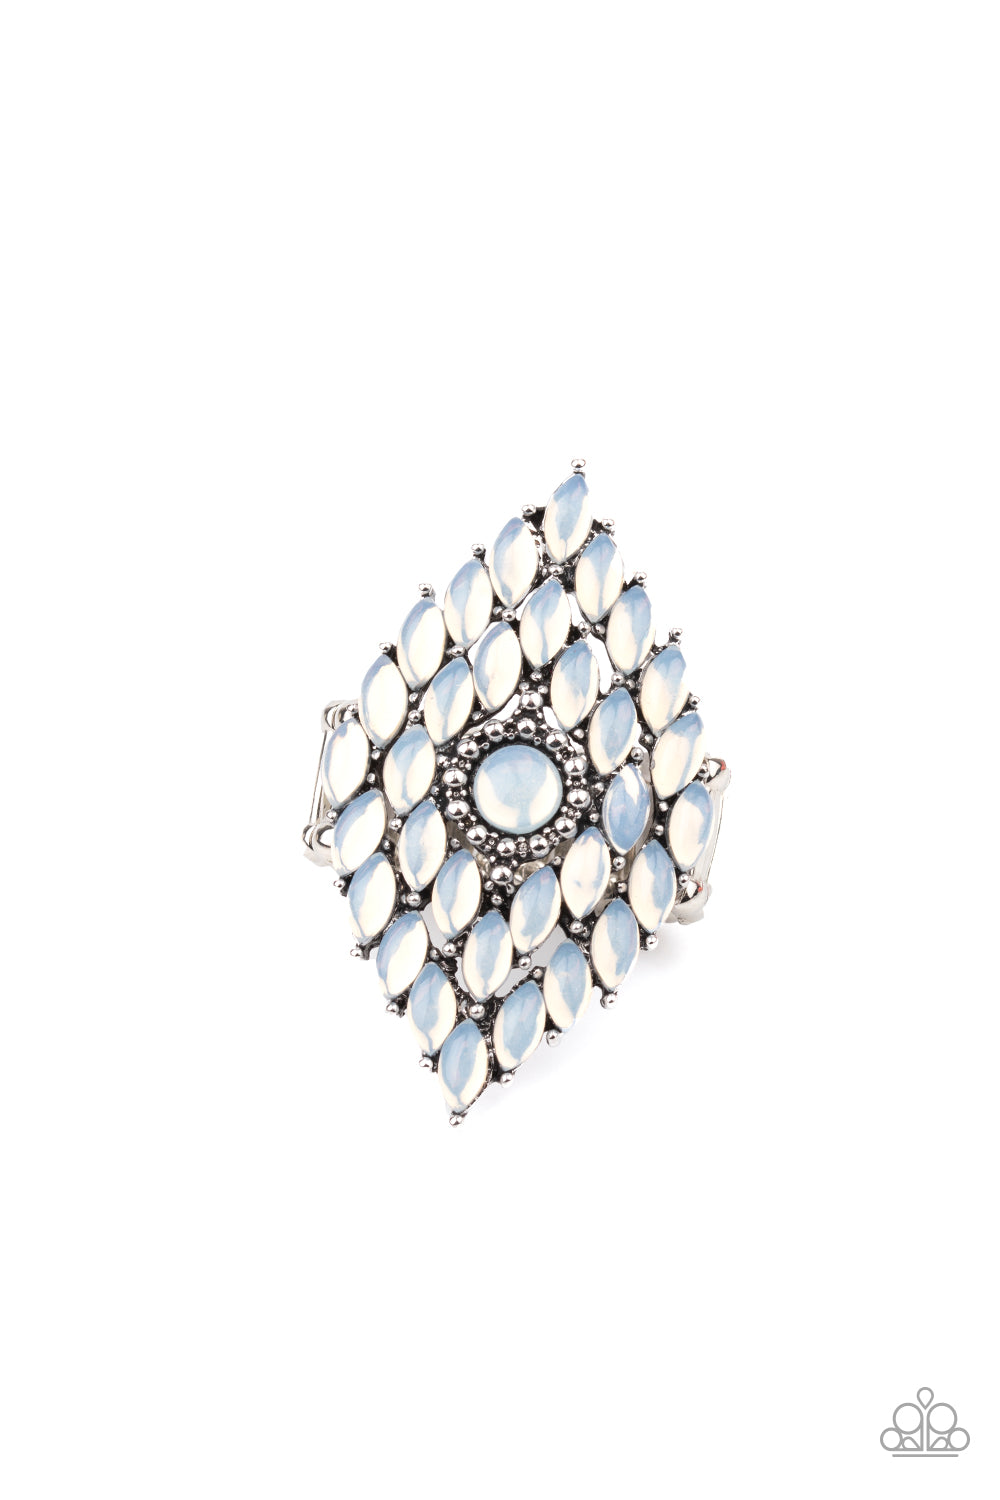 Paparazzi Incandescently Irresistible - White Ring - June 2021 Life Of The Party Exclusive - A Finishing Touch Jewelry